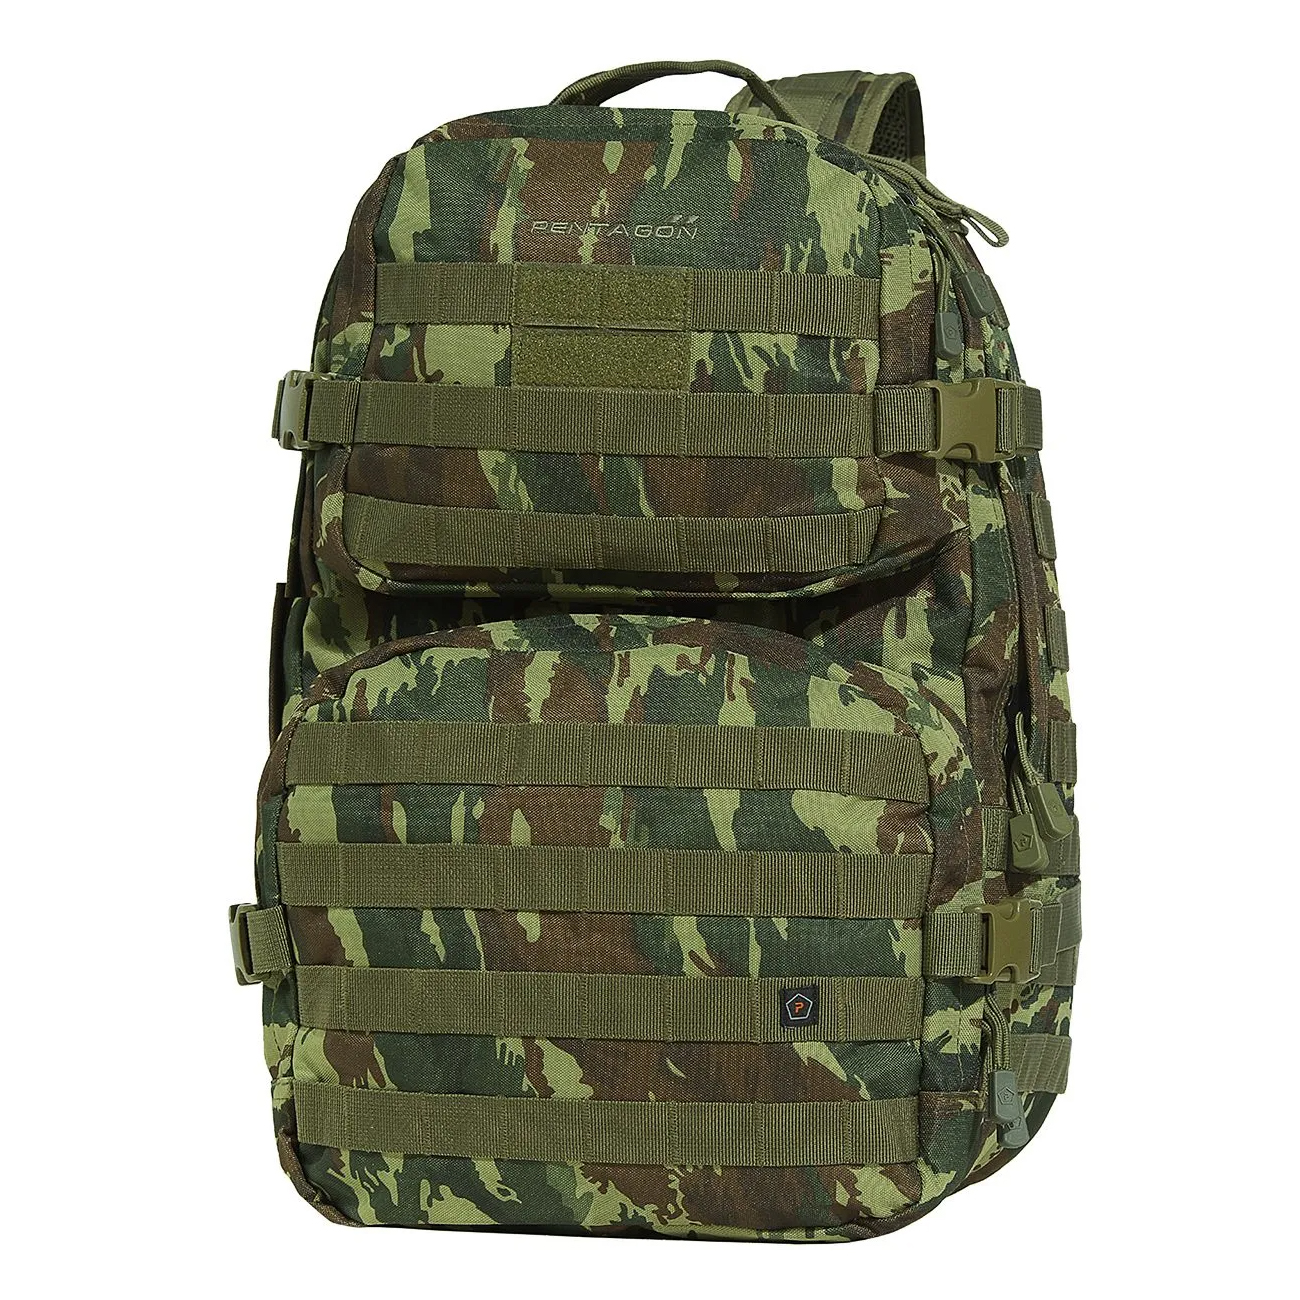 Pentagon - EOS Tactical Bug Out Backpack